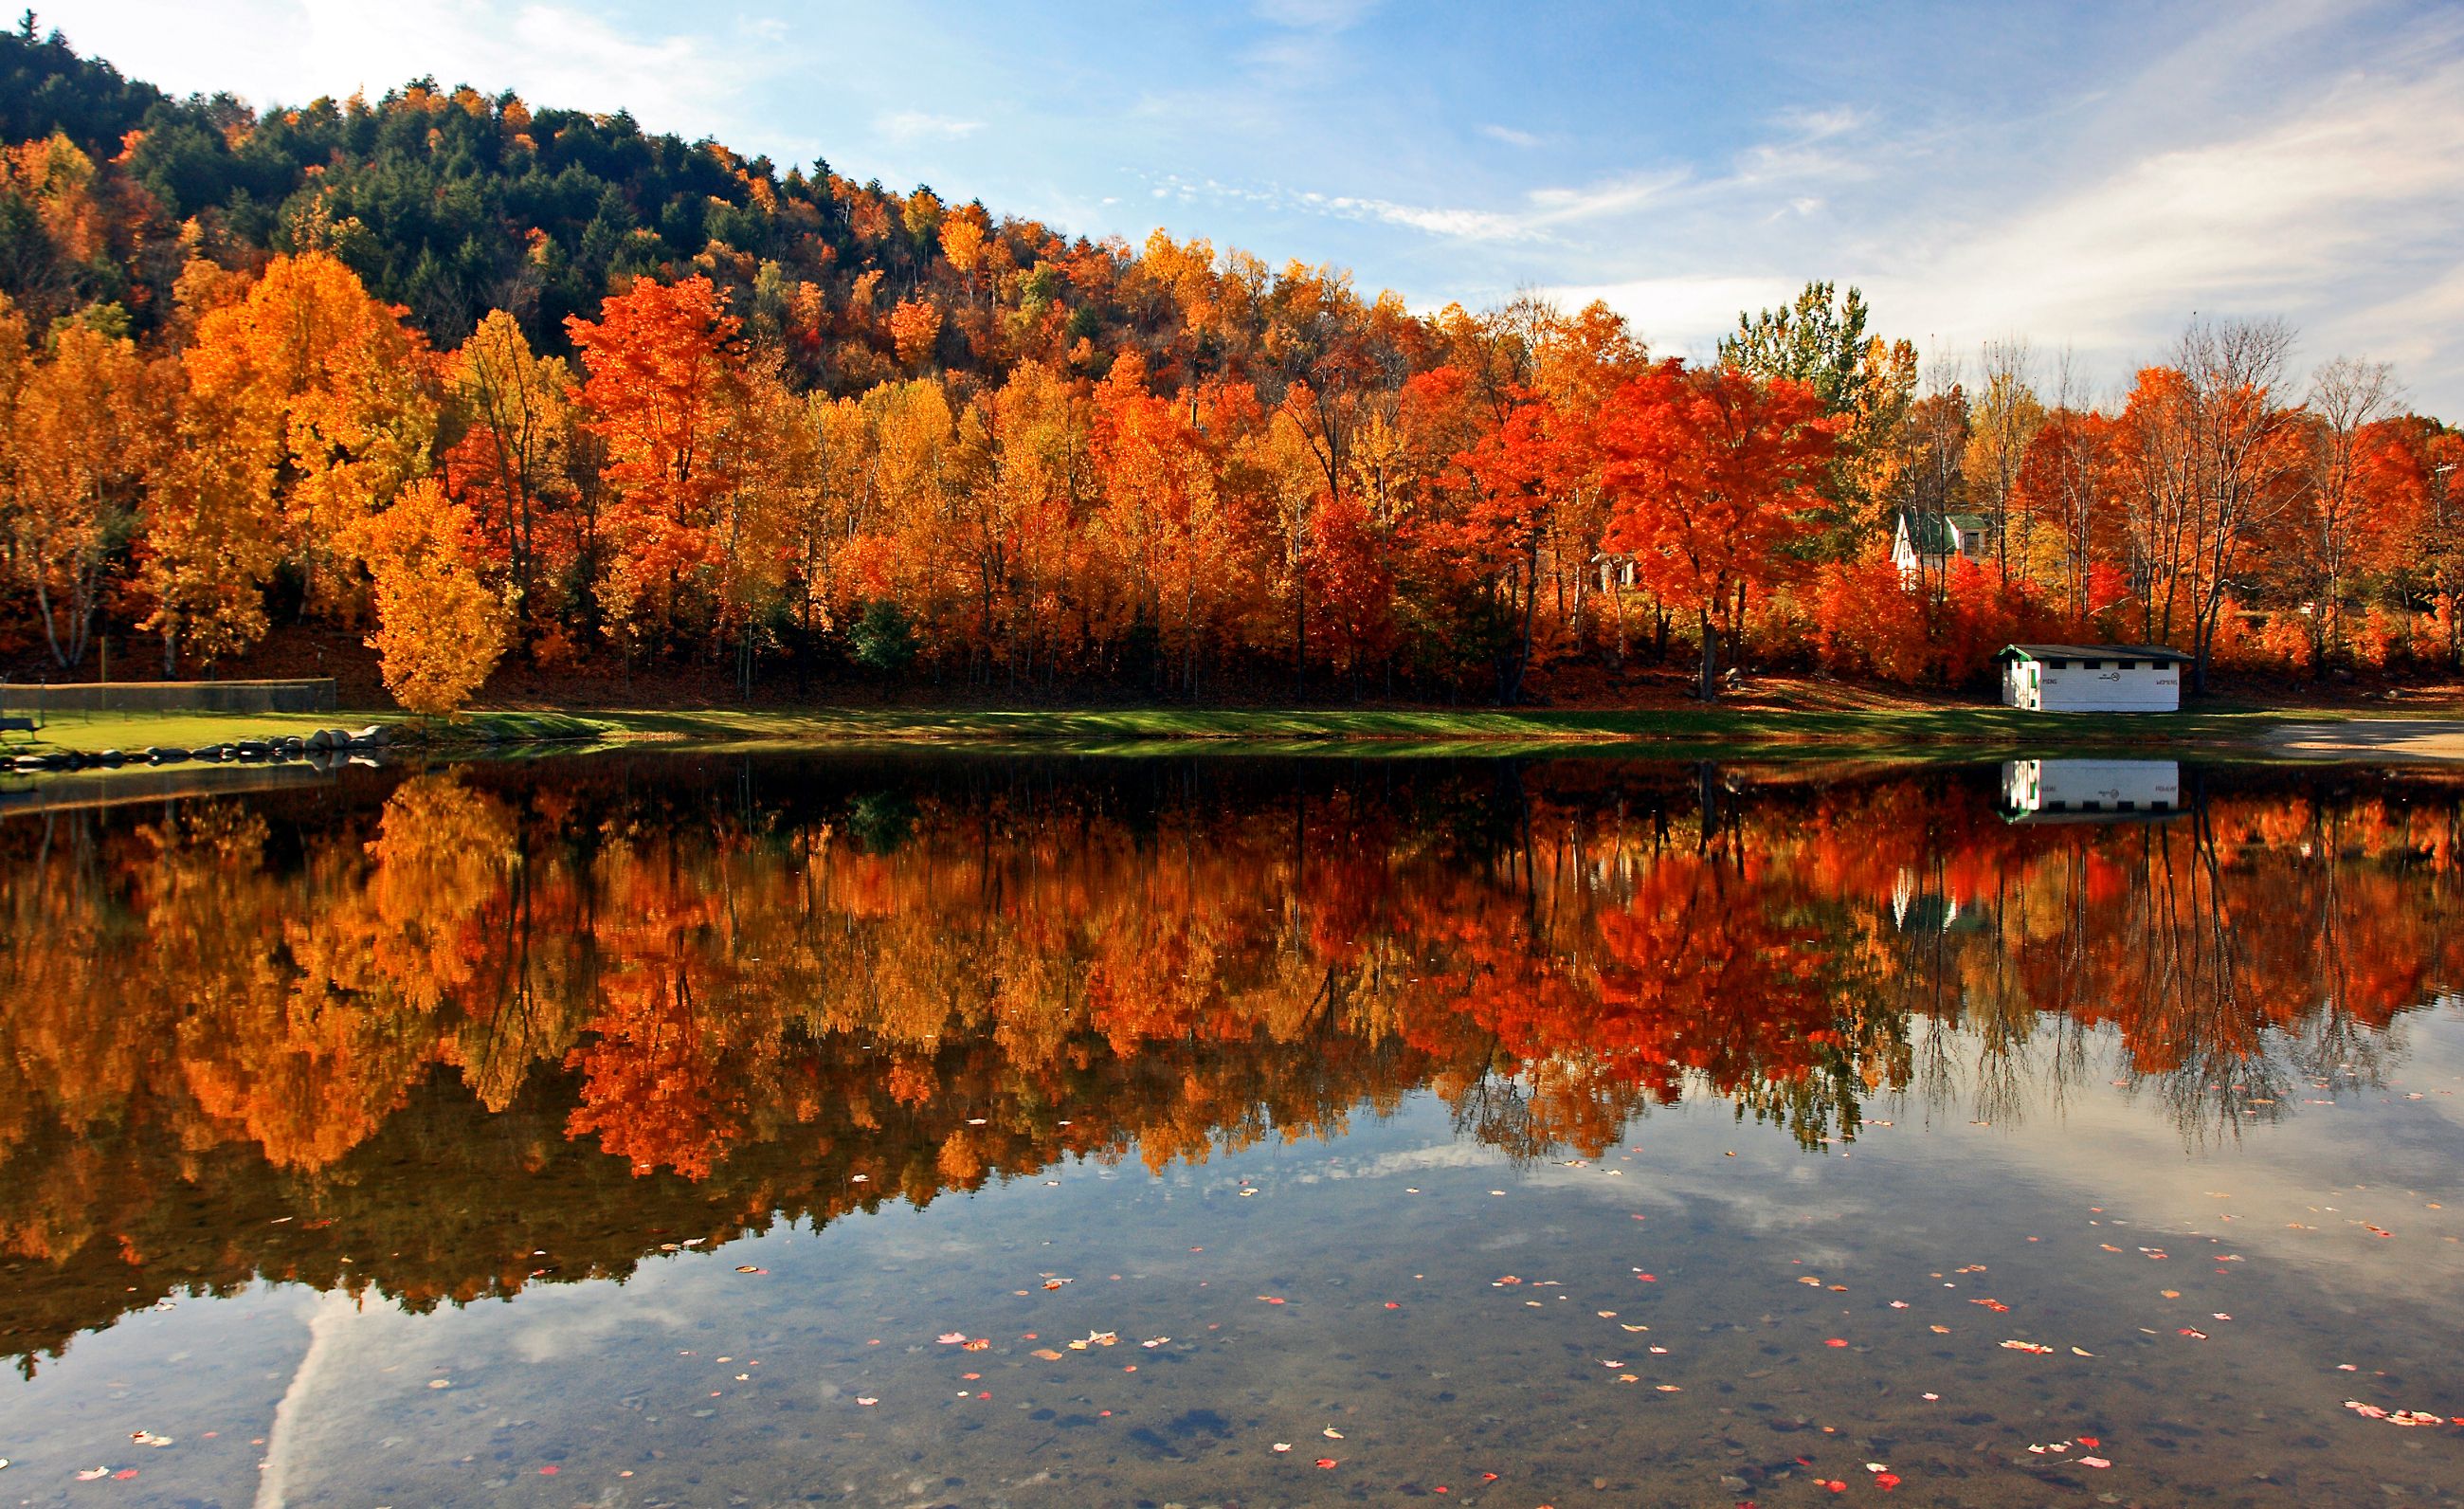 50 Beautiful Fall Foliage Pictures 2023 - Photos of Autumn Leaves